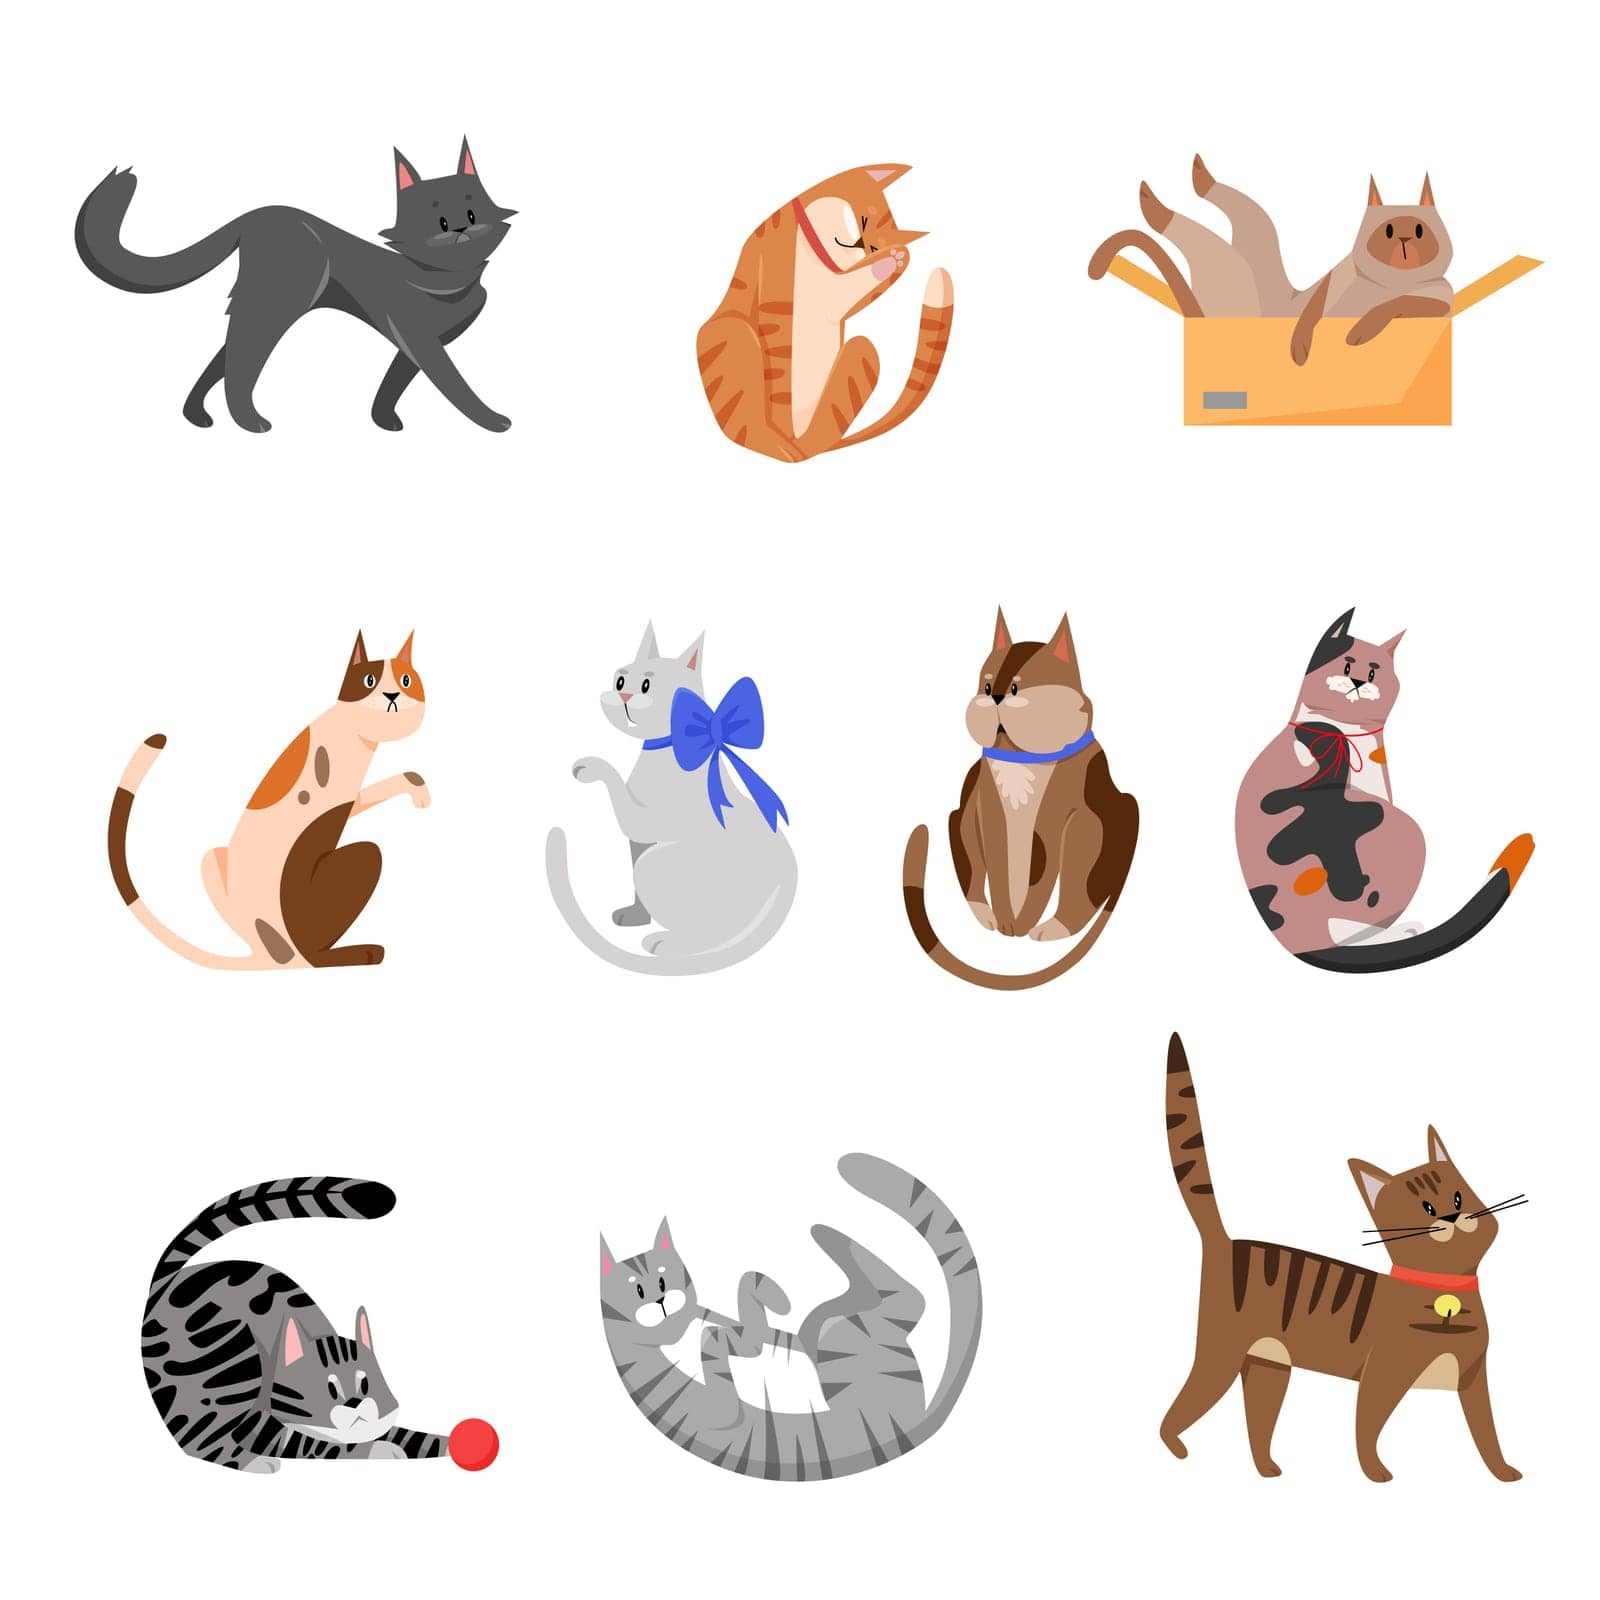 Purebred cats, playful pets vector illustrations set. Cute mammals, thoroughbred cartoon animals collection. Domestic pedigreed kittens with collars and bows pack isolated on white background